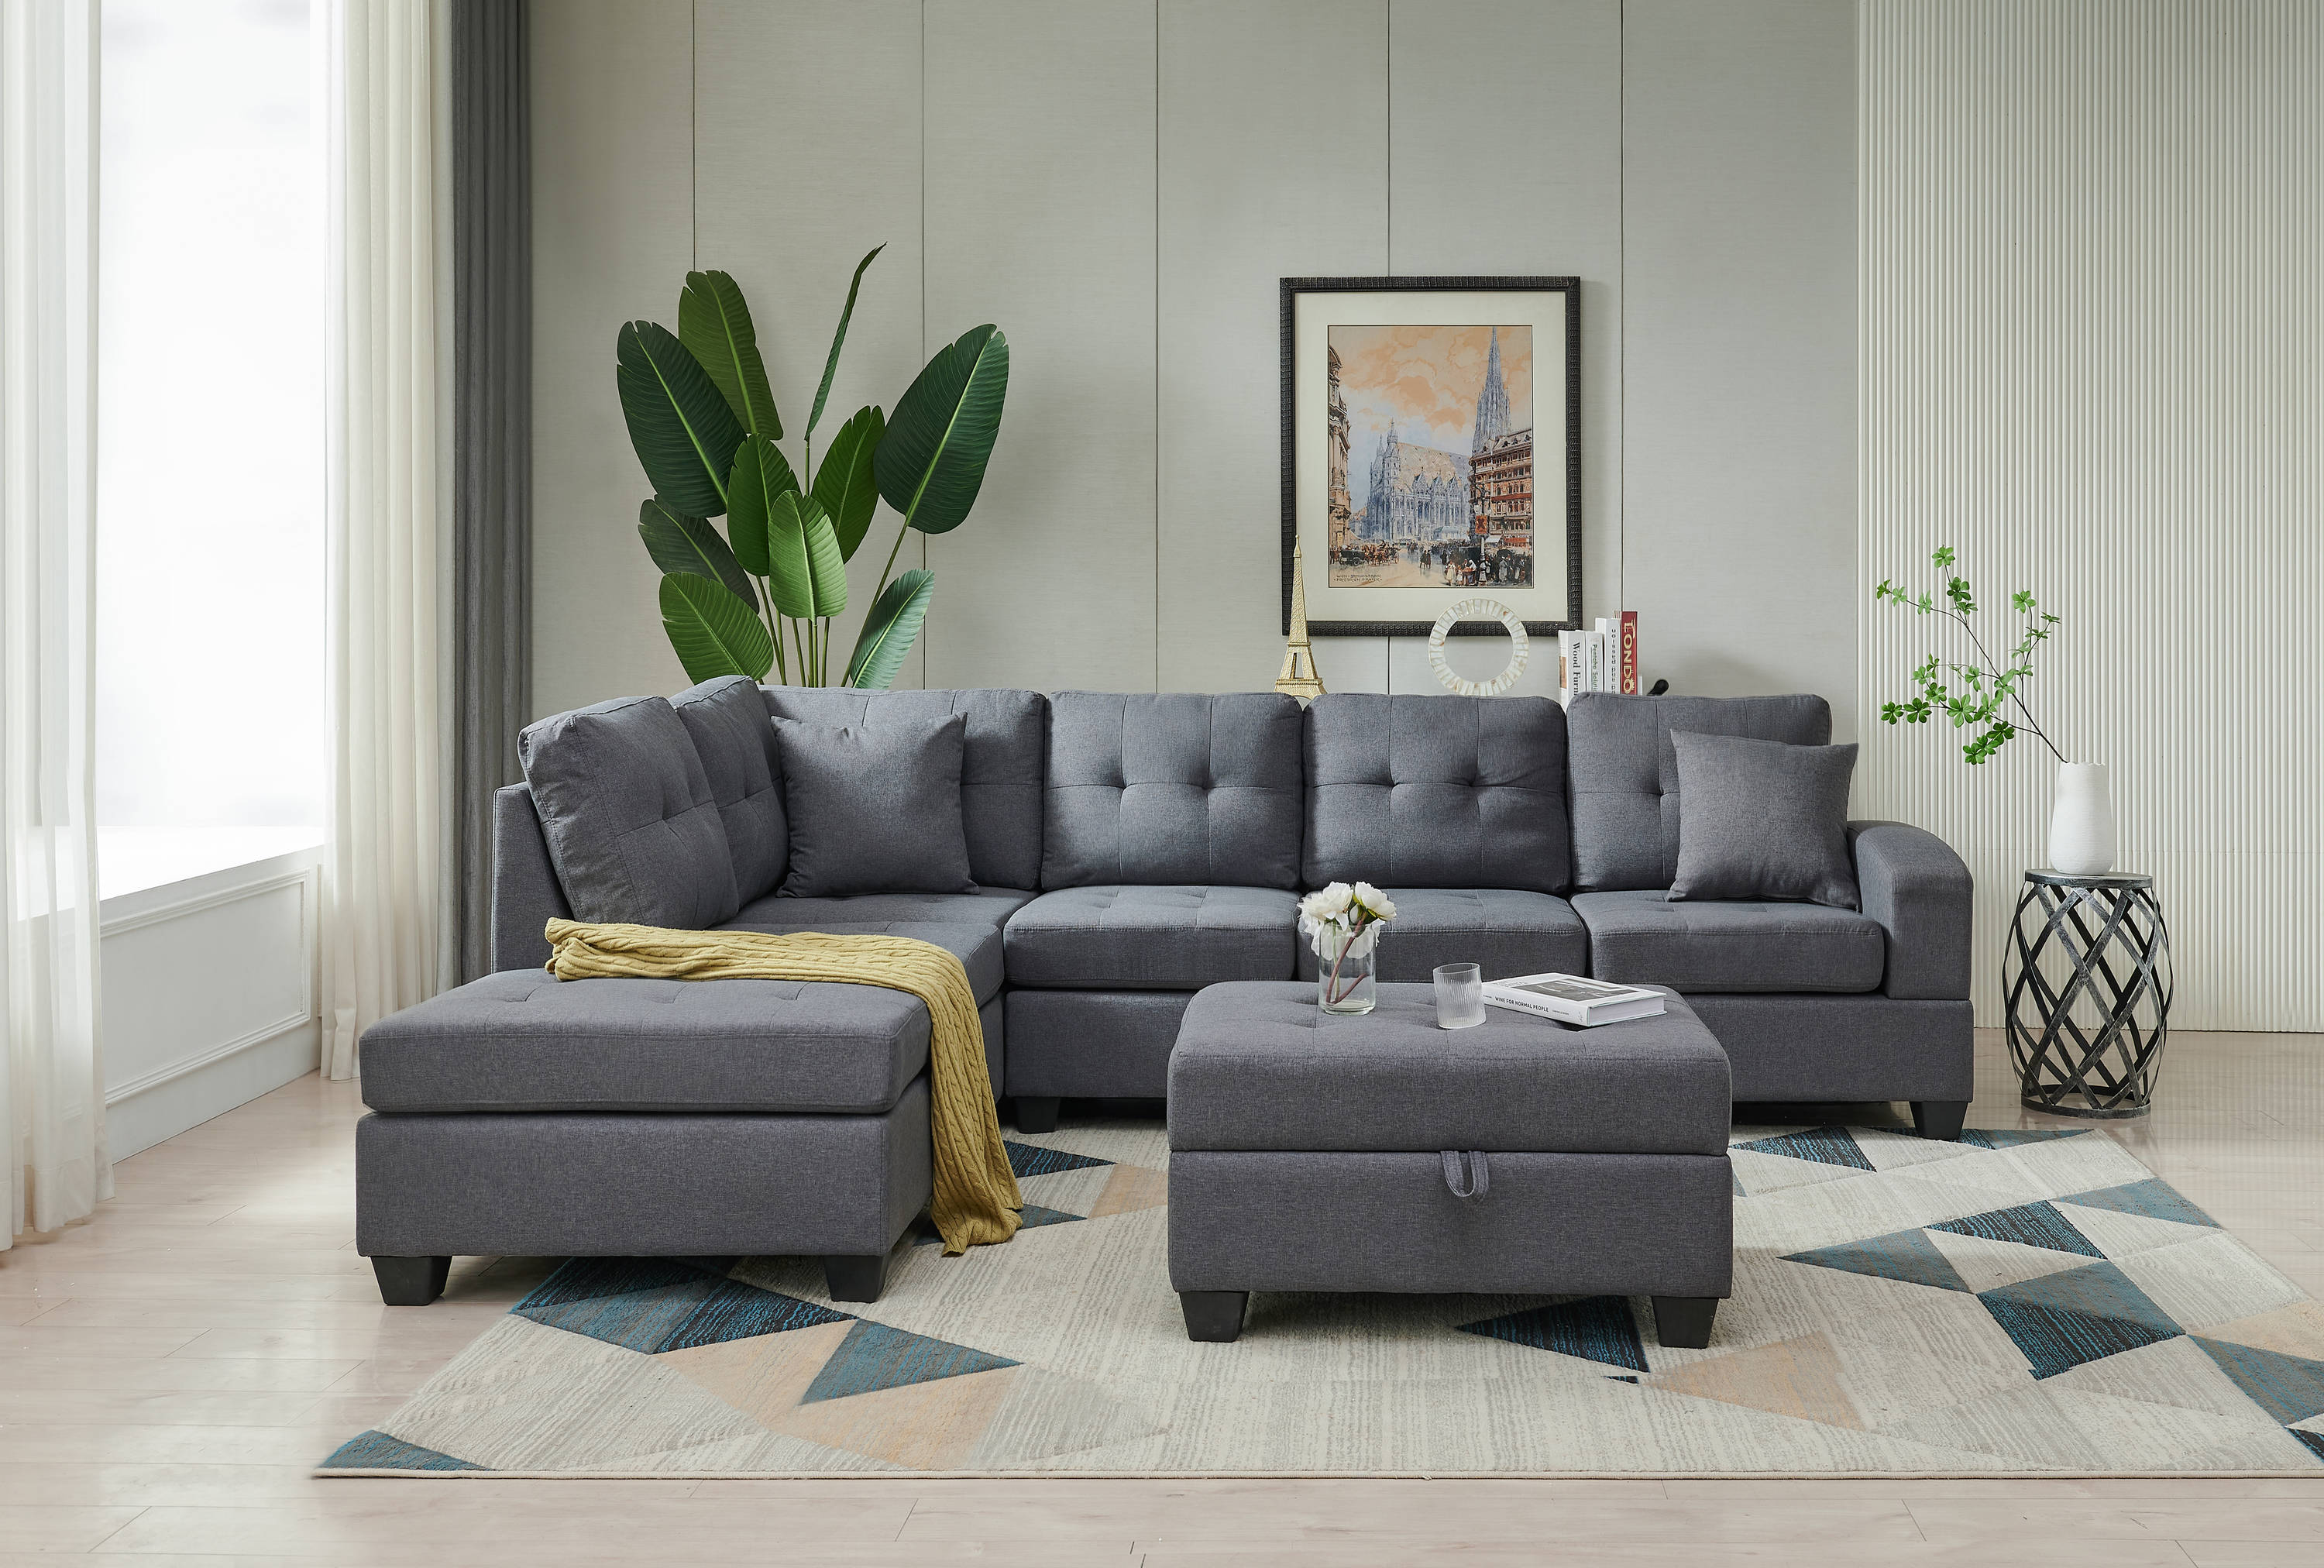 L-Shaped Sectional Sofa Living Room 3 Piece Couch Set with Reversible Chaise Lounge Rivet Storage Ottoman and Two Cup Holders Grey